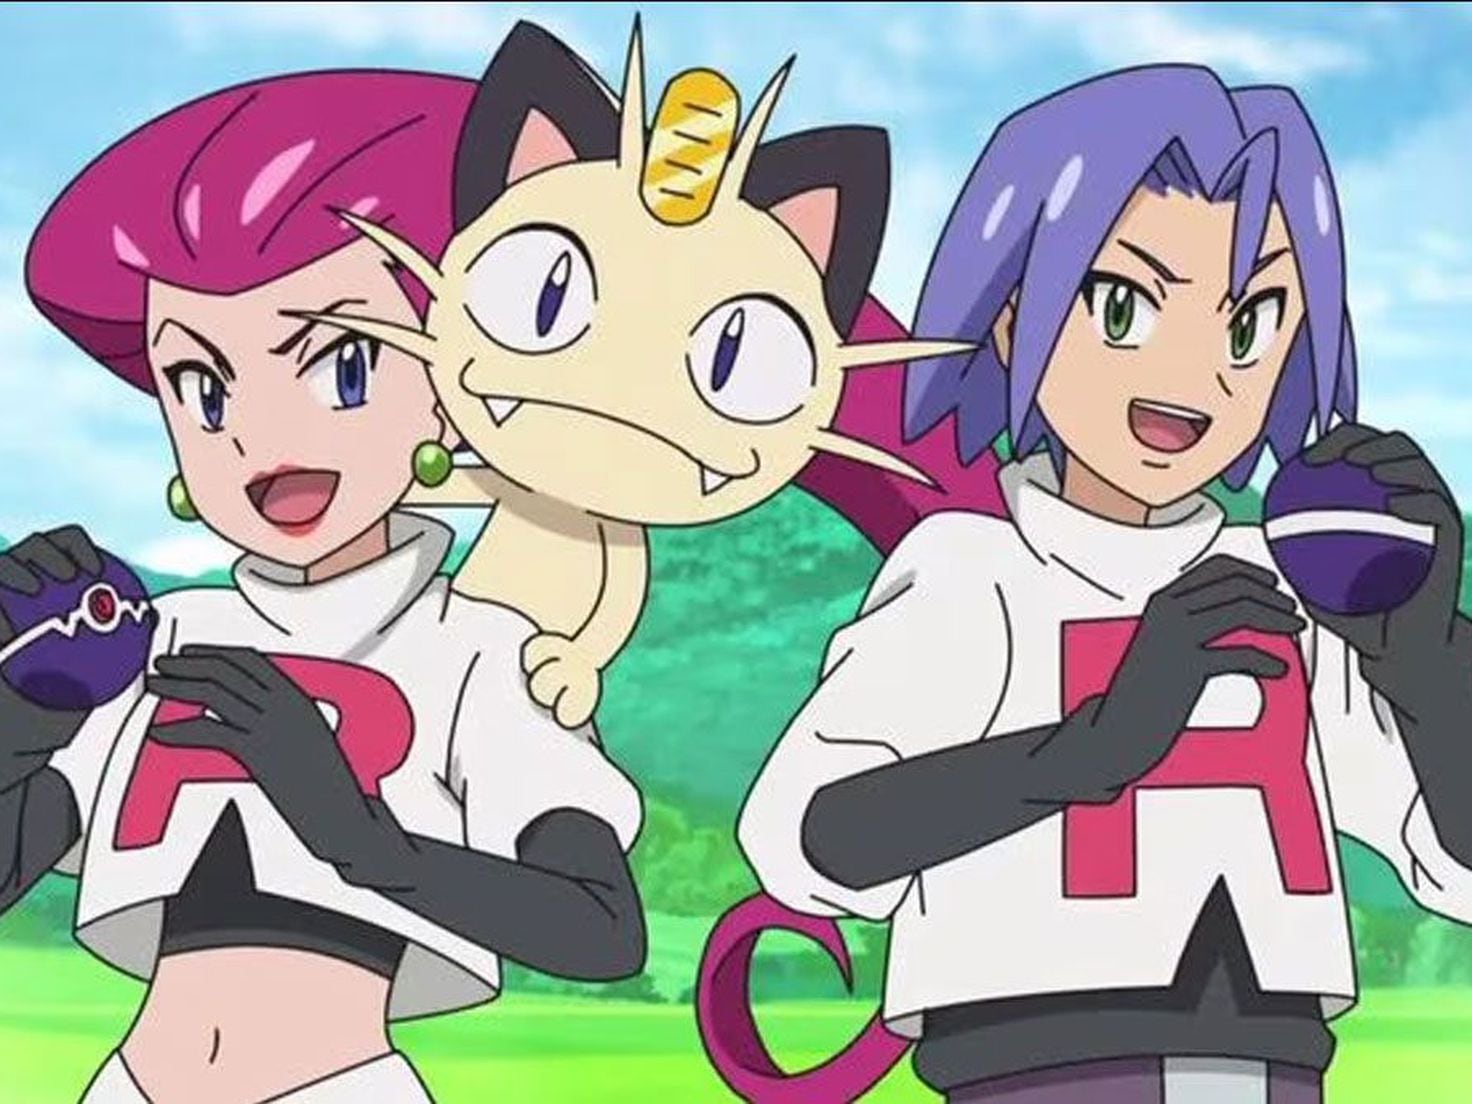 After 25 years of trying to steal Pikachu, Team Rocket bids farewell in Pokémon Anime - Meristation